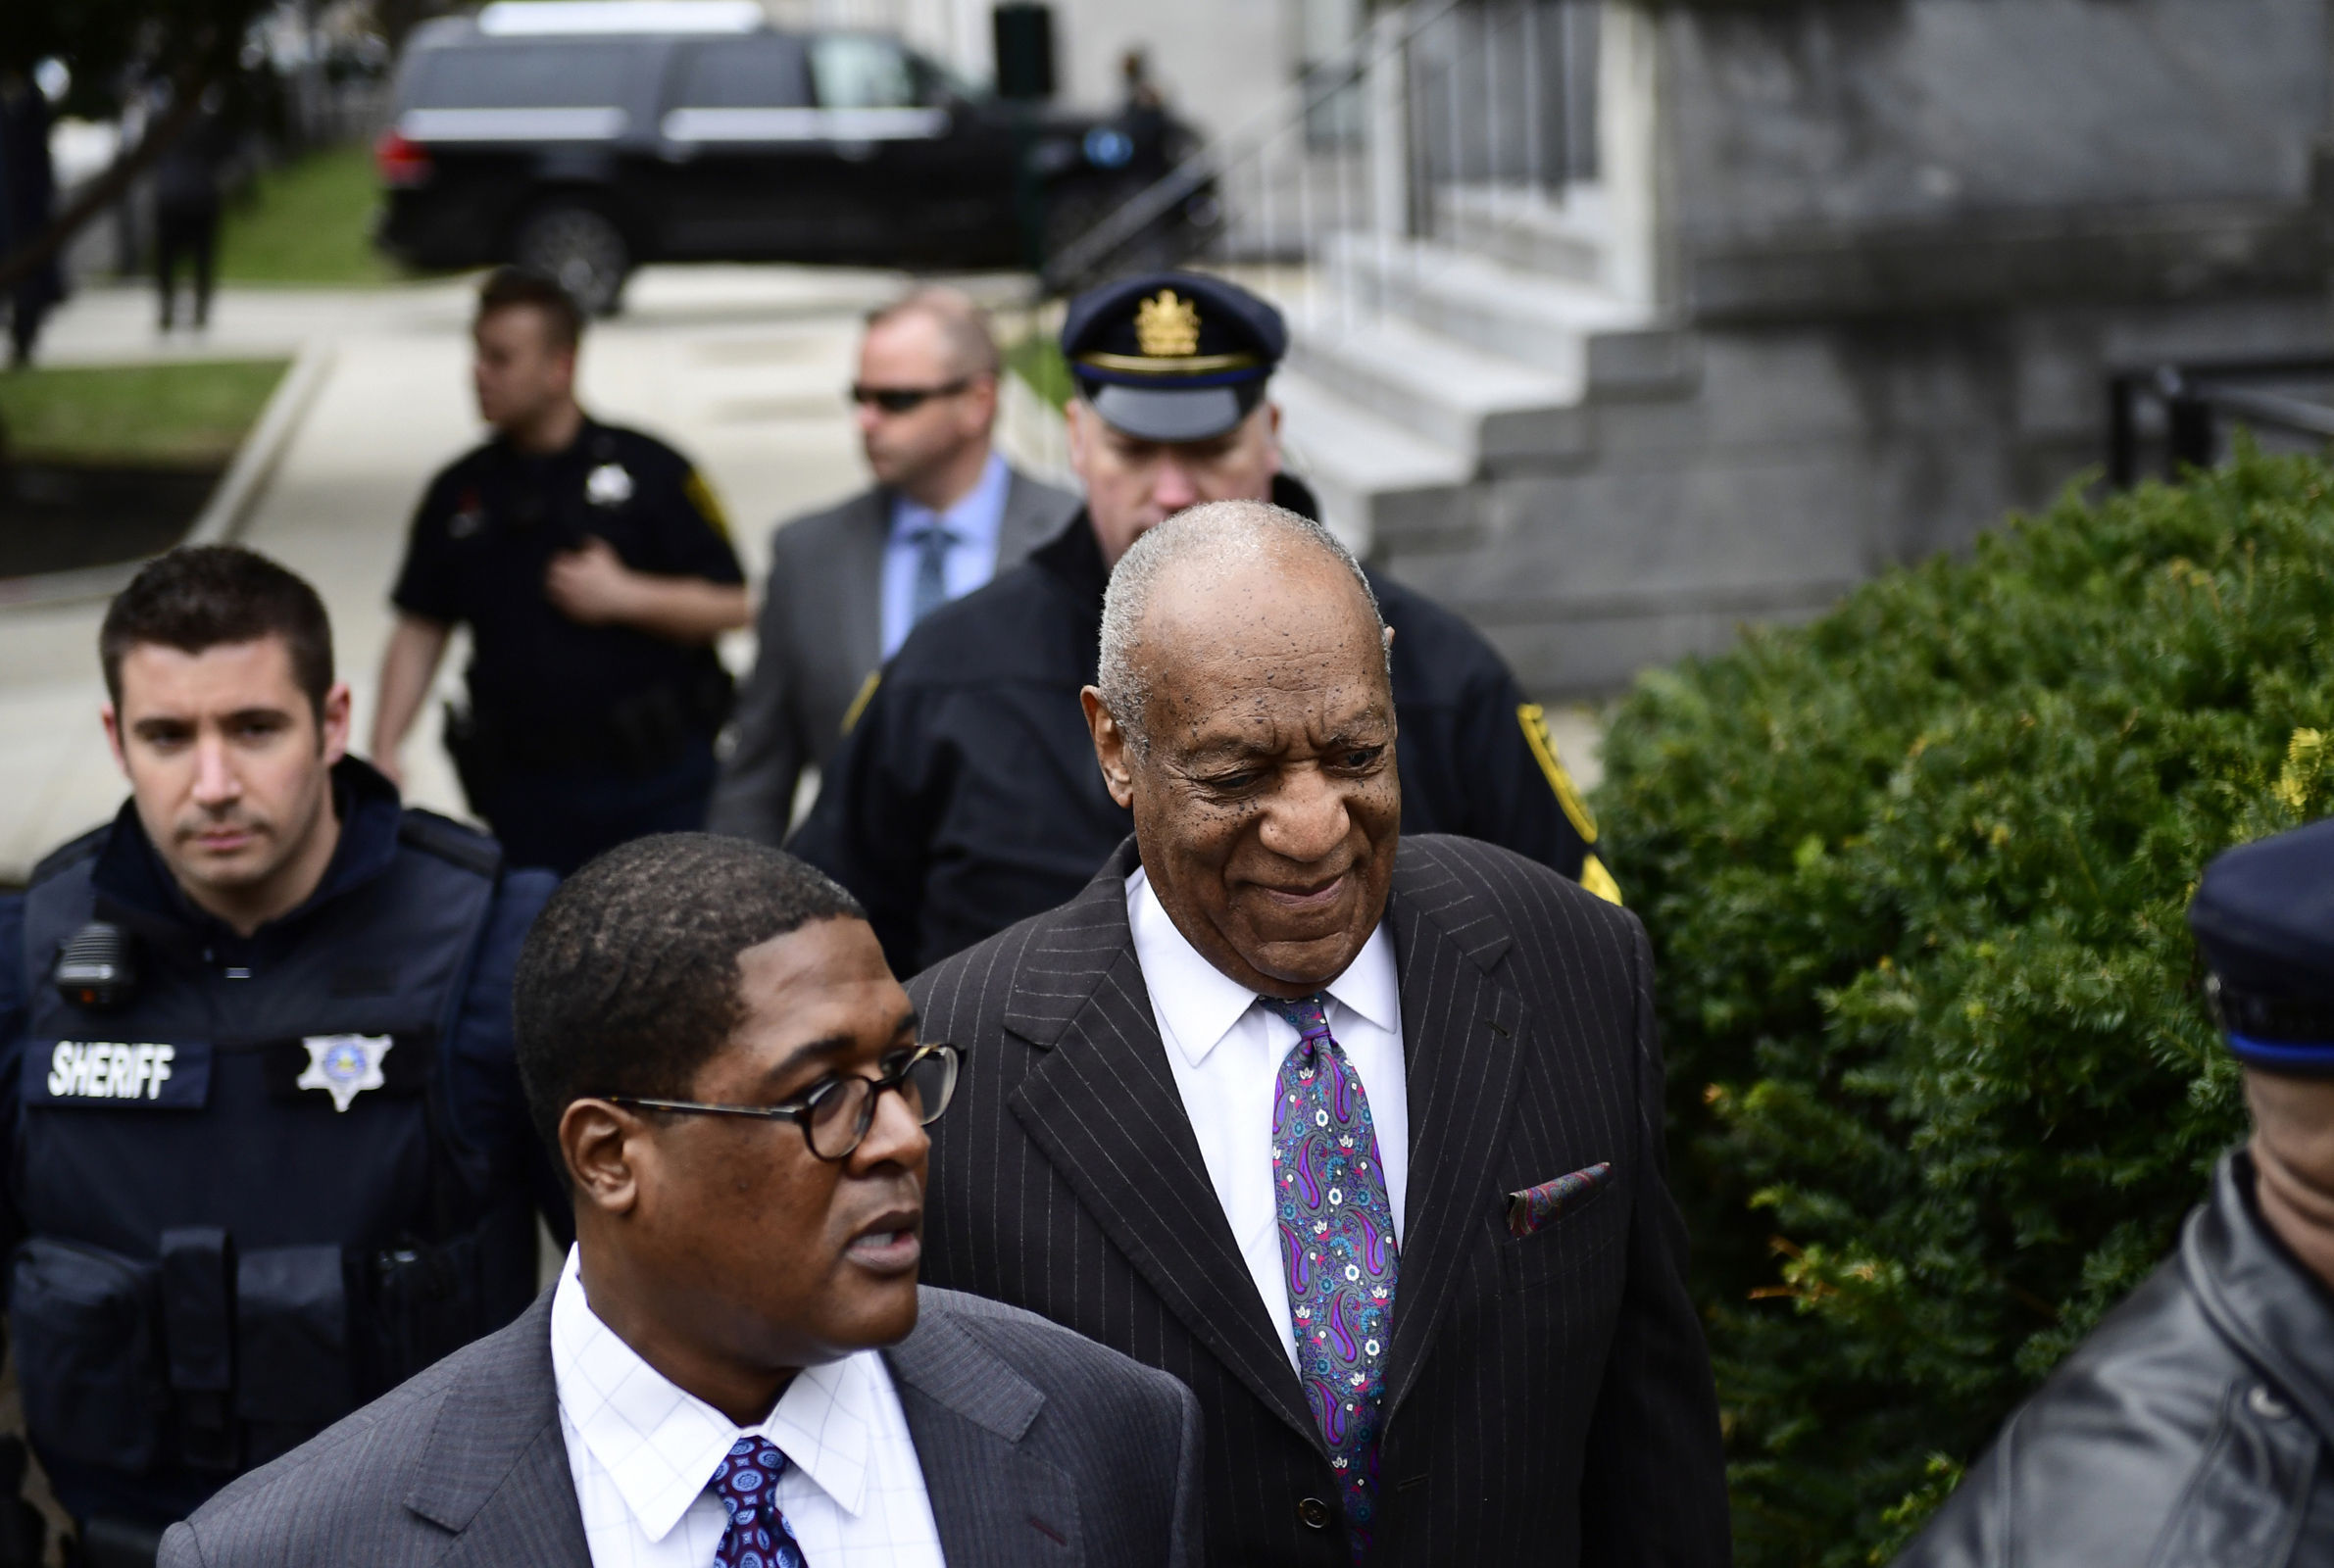 Bill Cosby arrives for his sexual assault trial at the Montgomery County Courthouse in Norristown (Corey Perrine/AP)